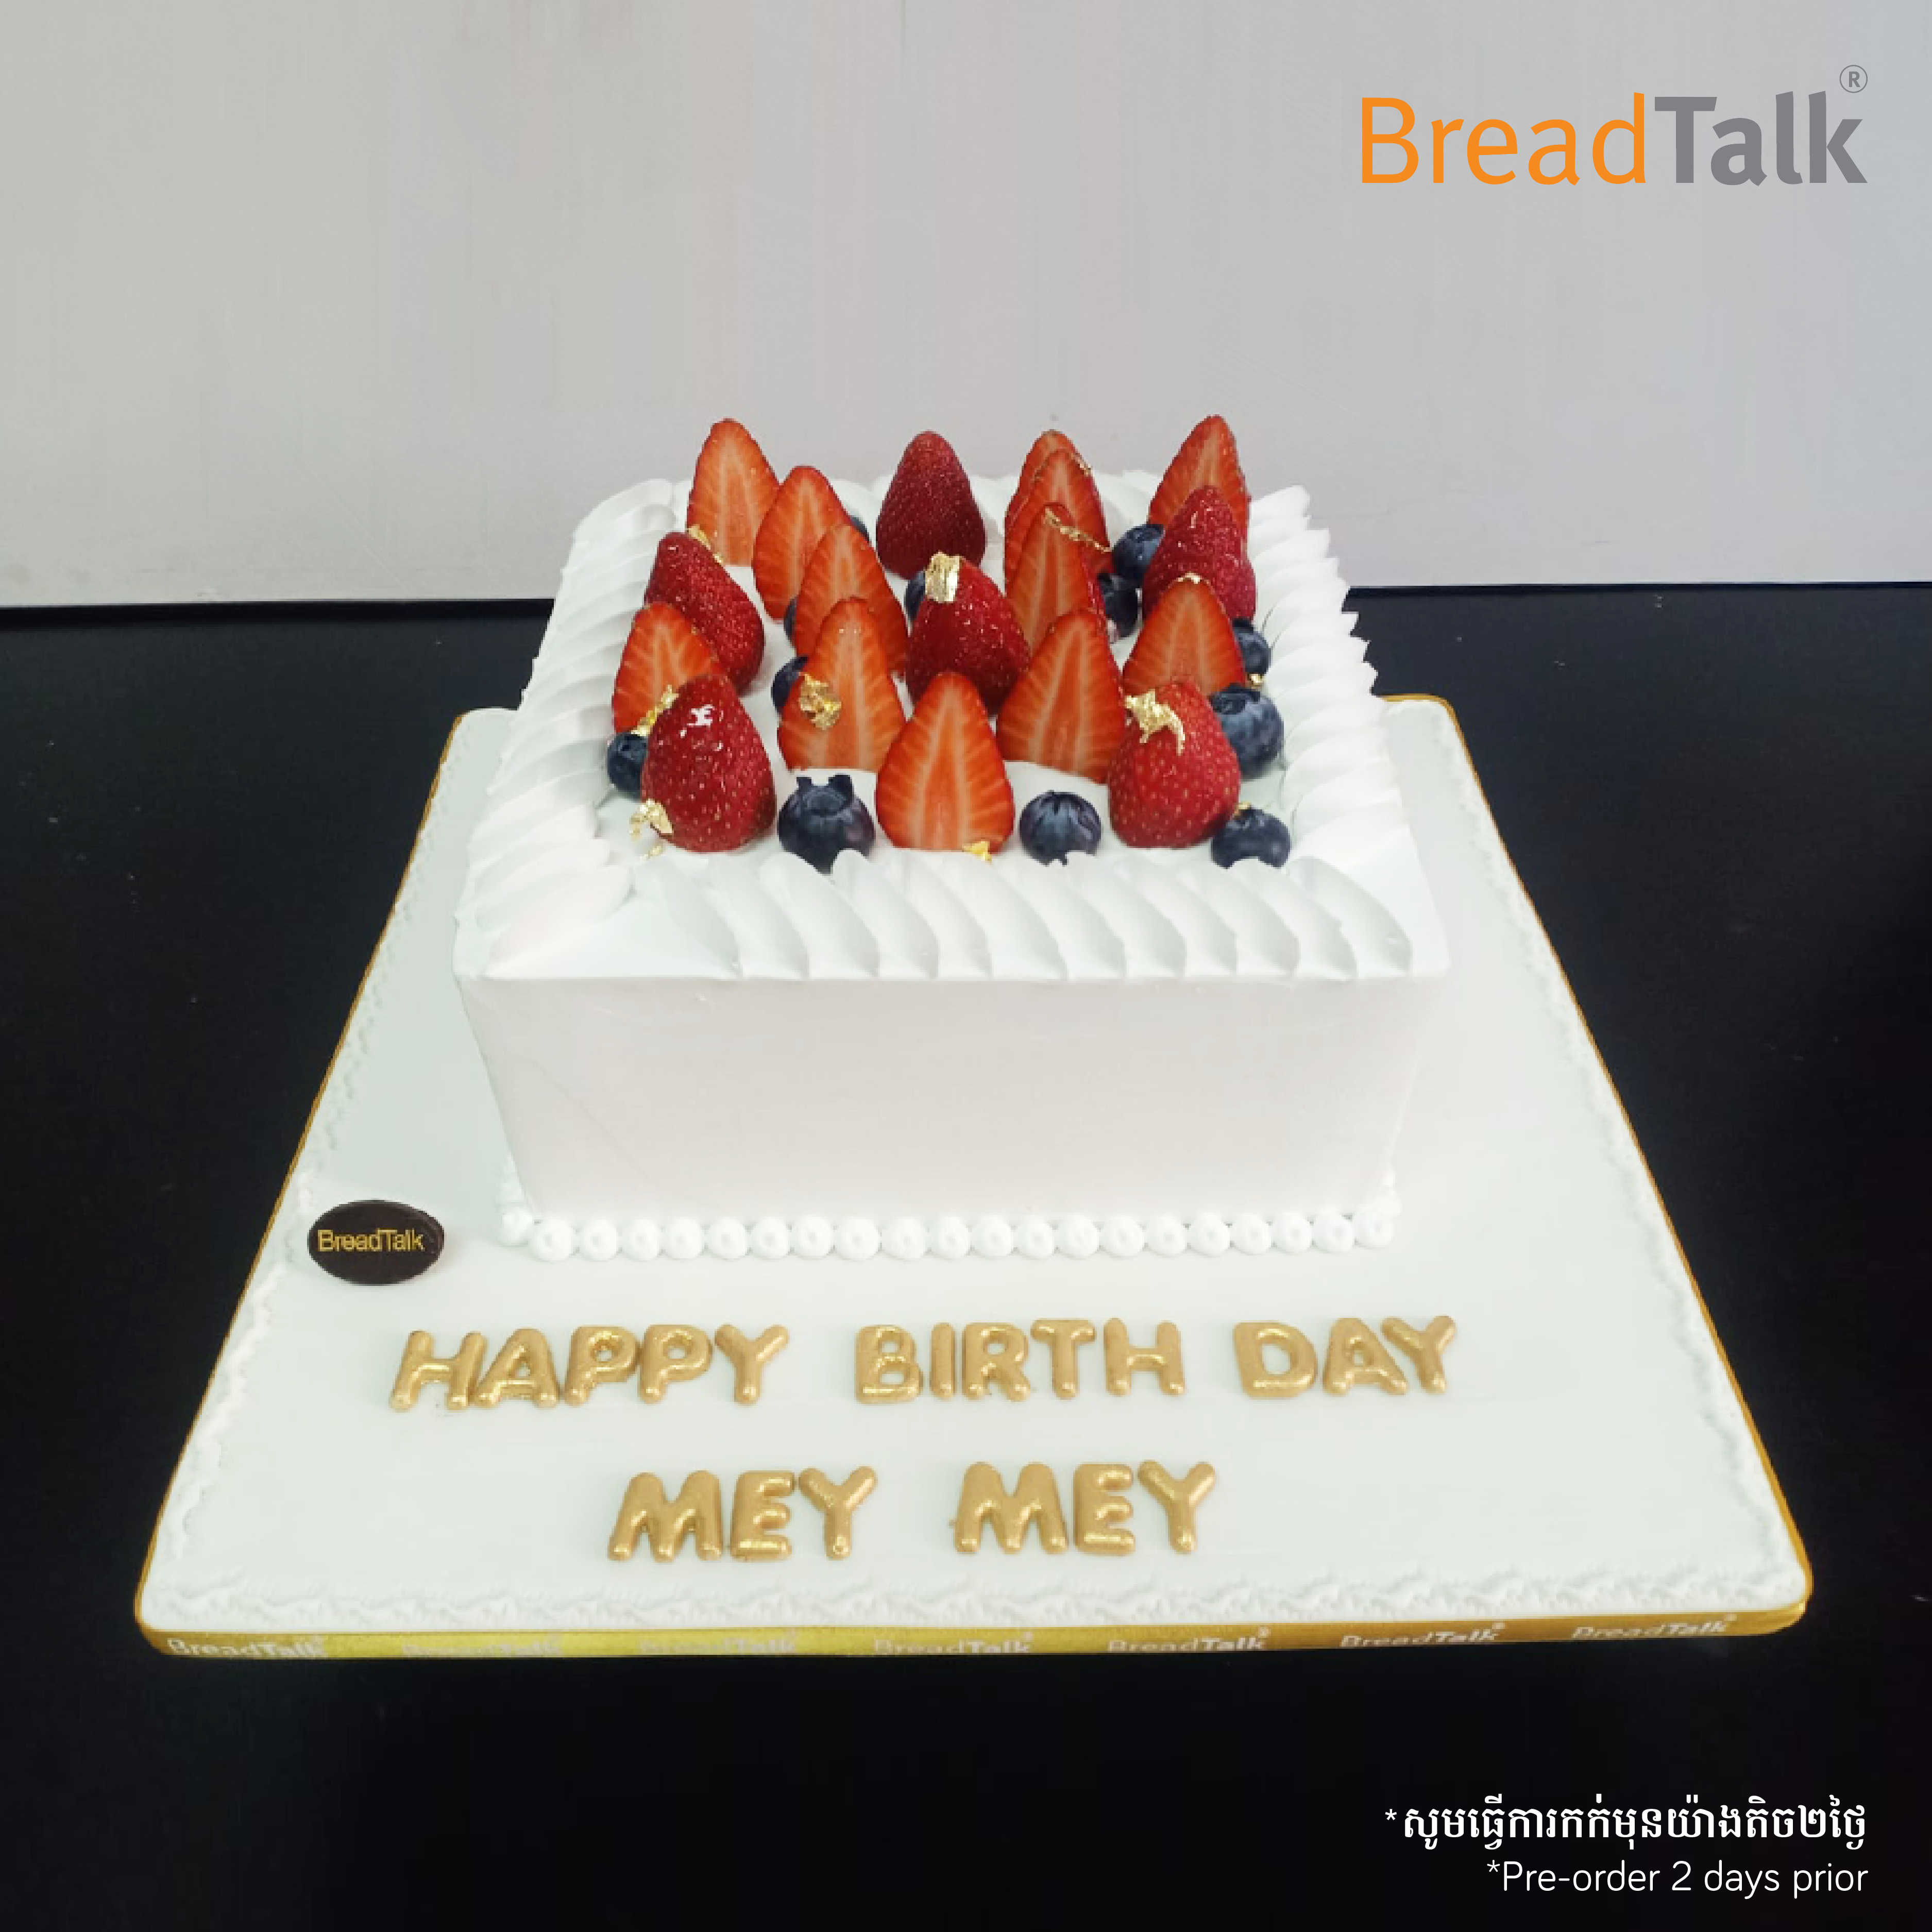 Orders are now open for your... - BreadTalk® Singapore | Facebook